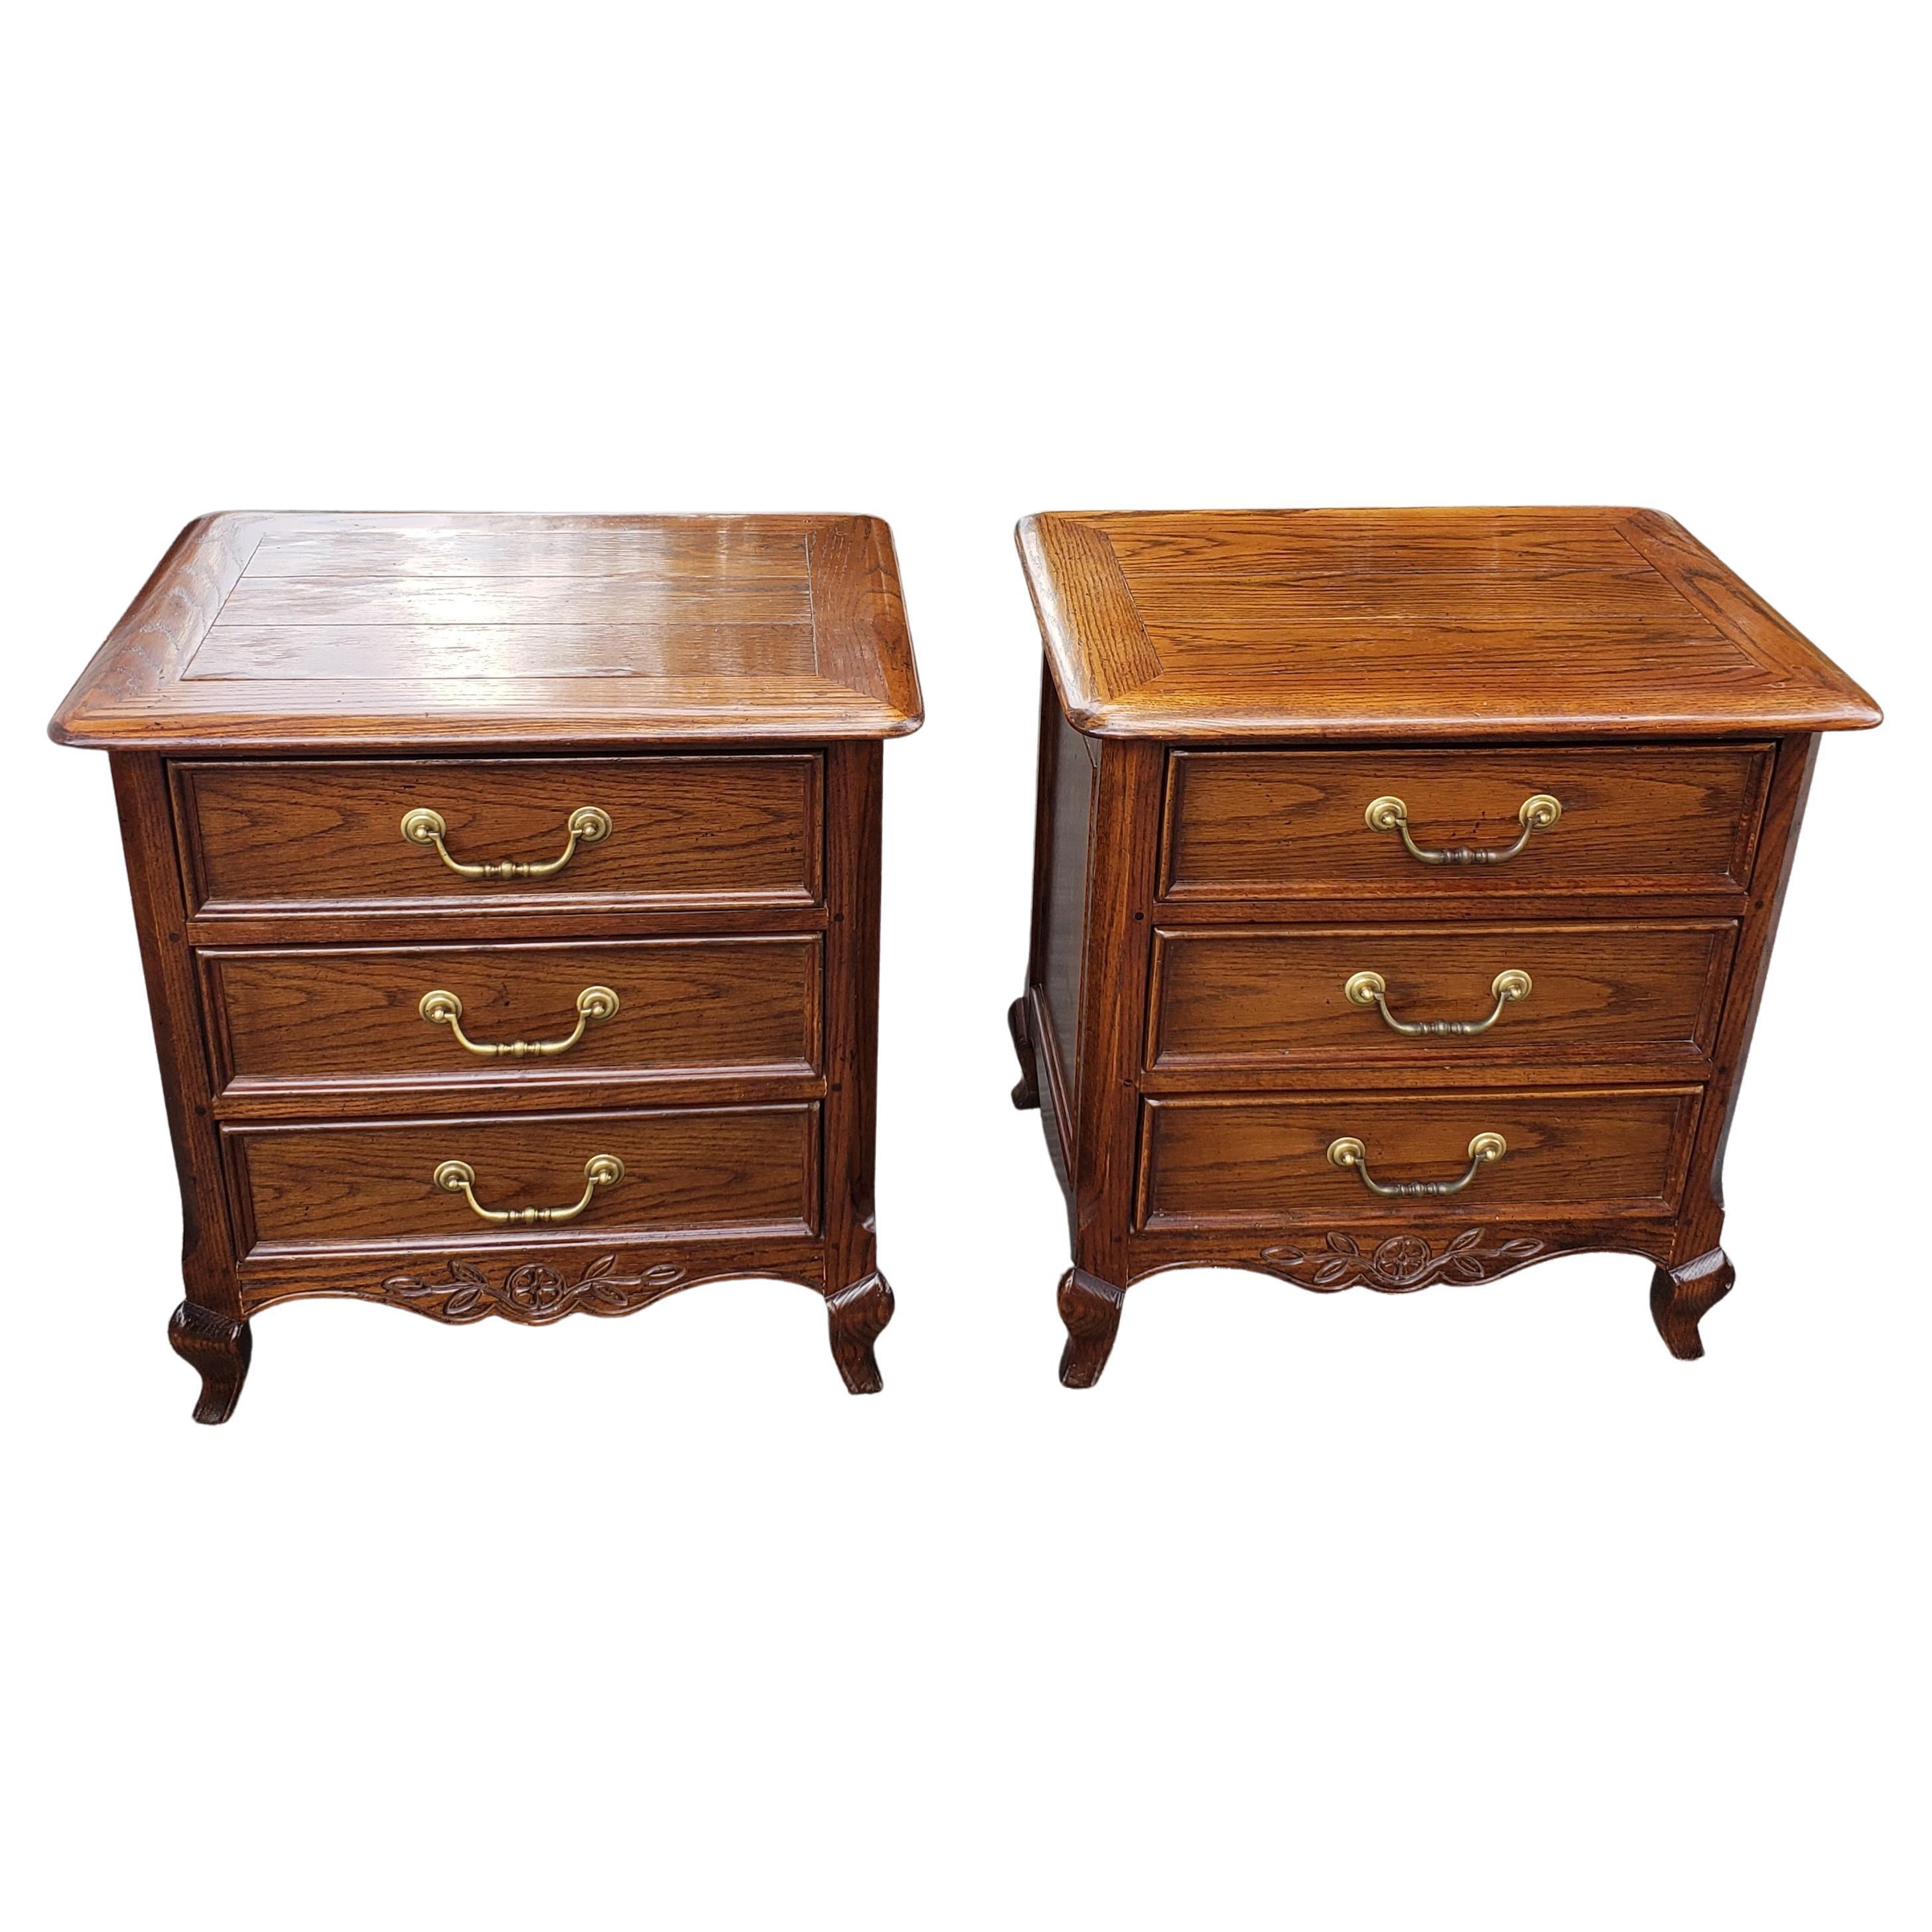 A stunning pair of solid red oak French style bedside chest of drawers/ Nightstands in good vintage condition. They come with original heavyweight brass drop pulls on the all dovetailed drawers.
Century furniture mark in place.
Measures 24.5